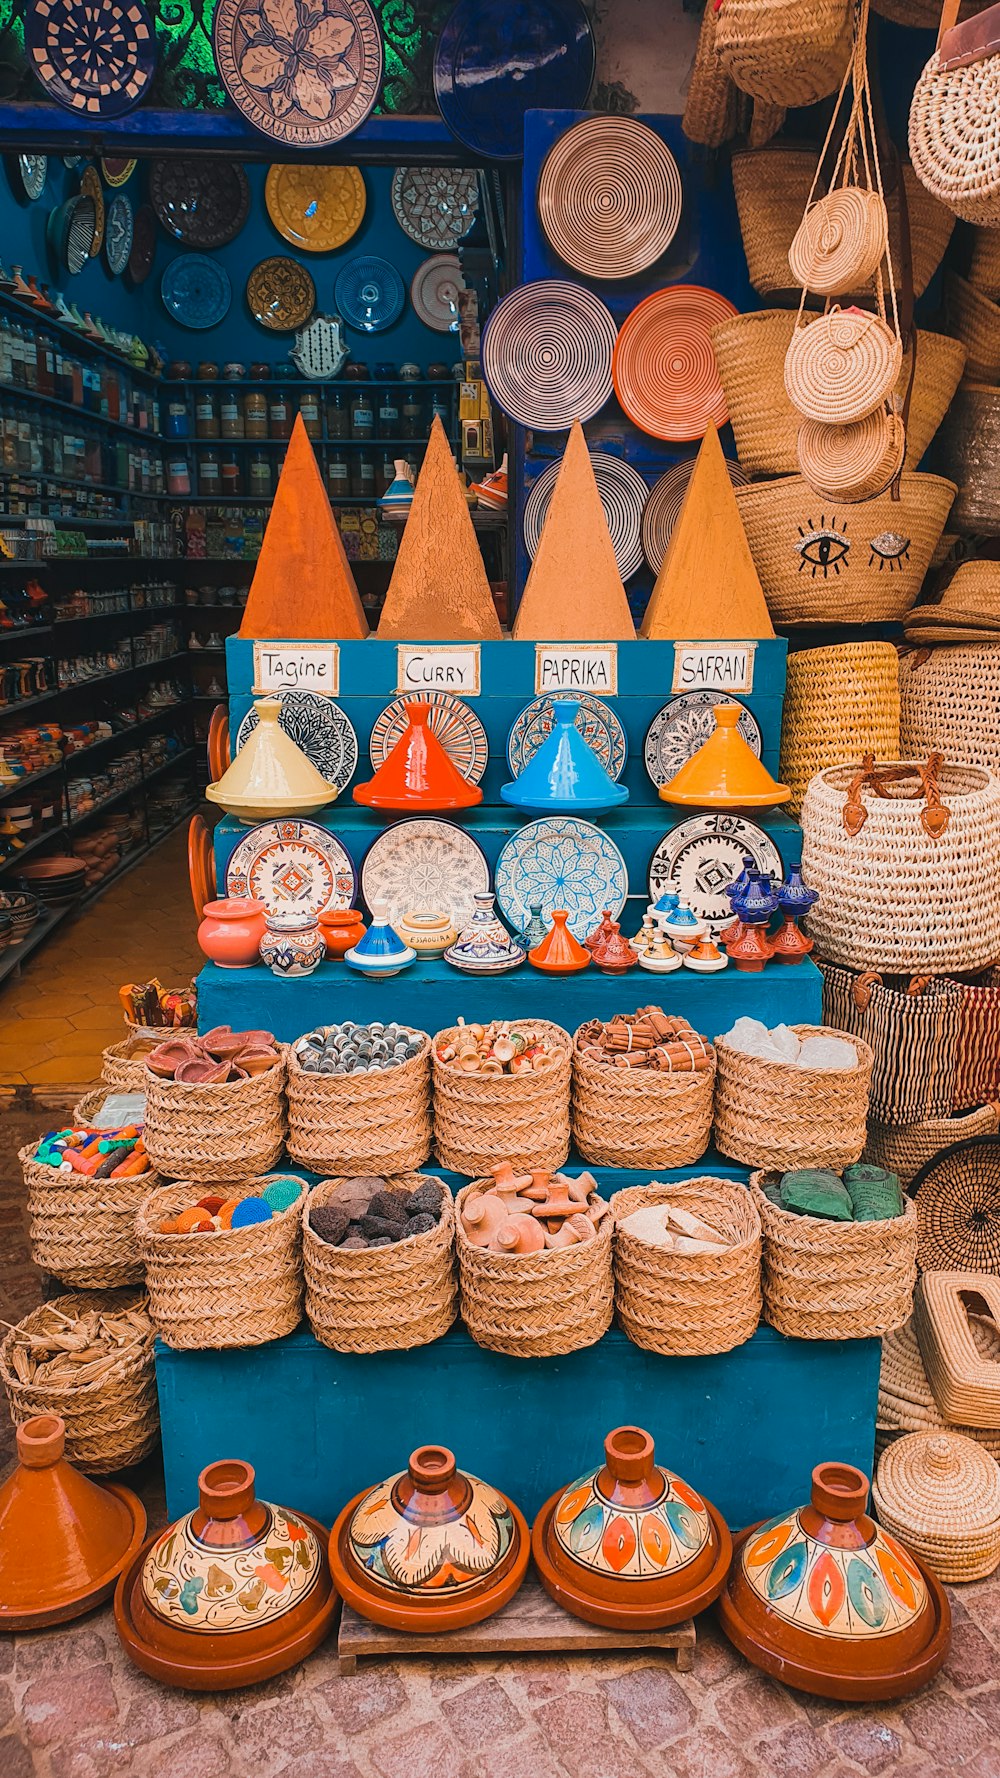 a display of baskets and plates in a store